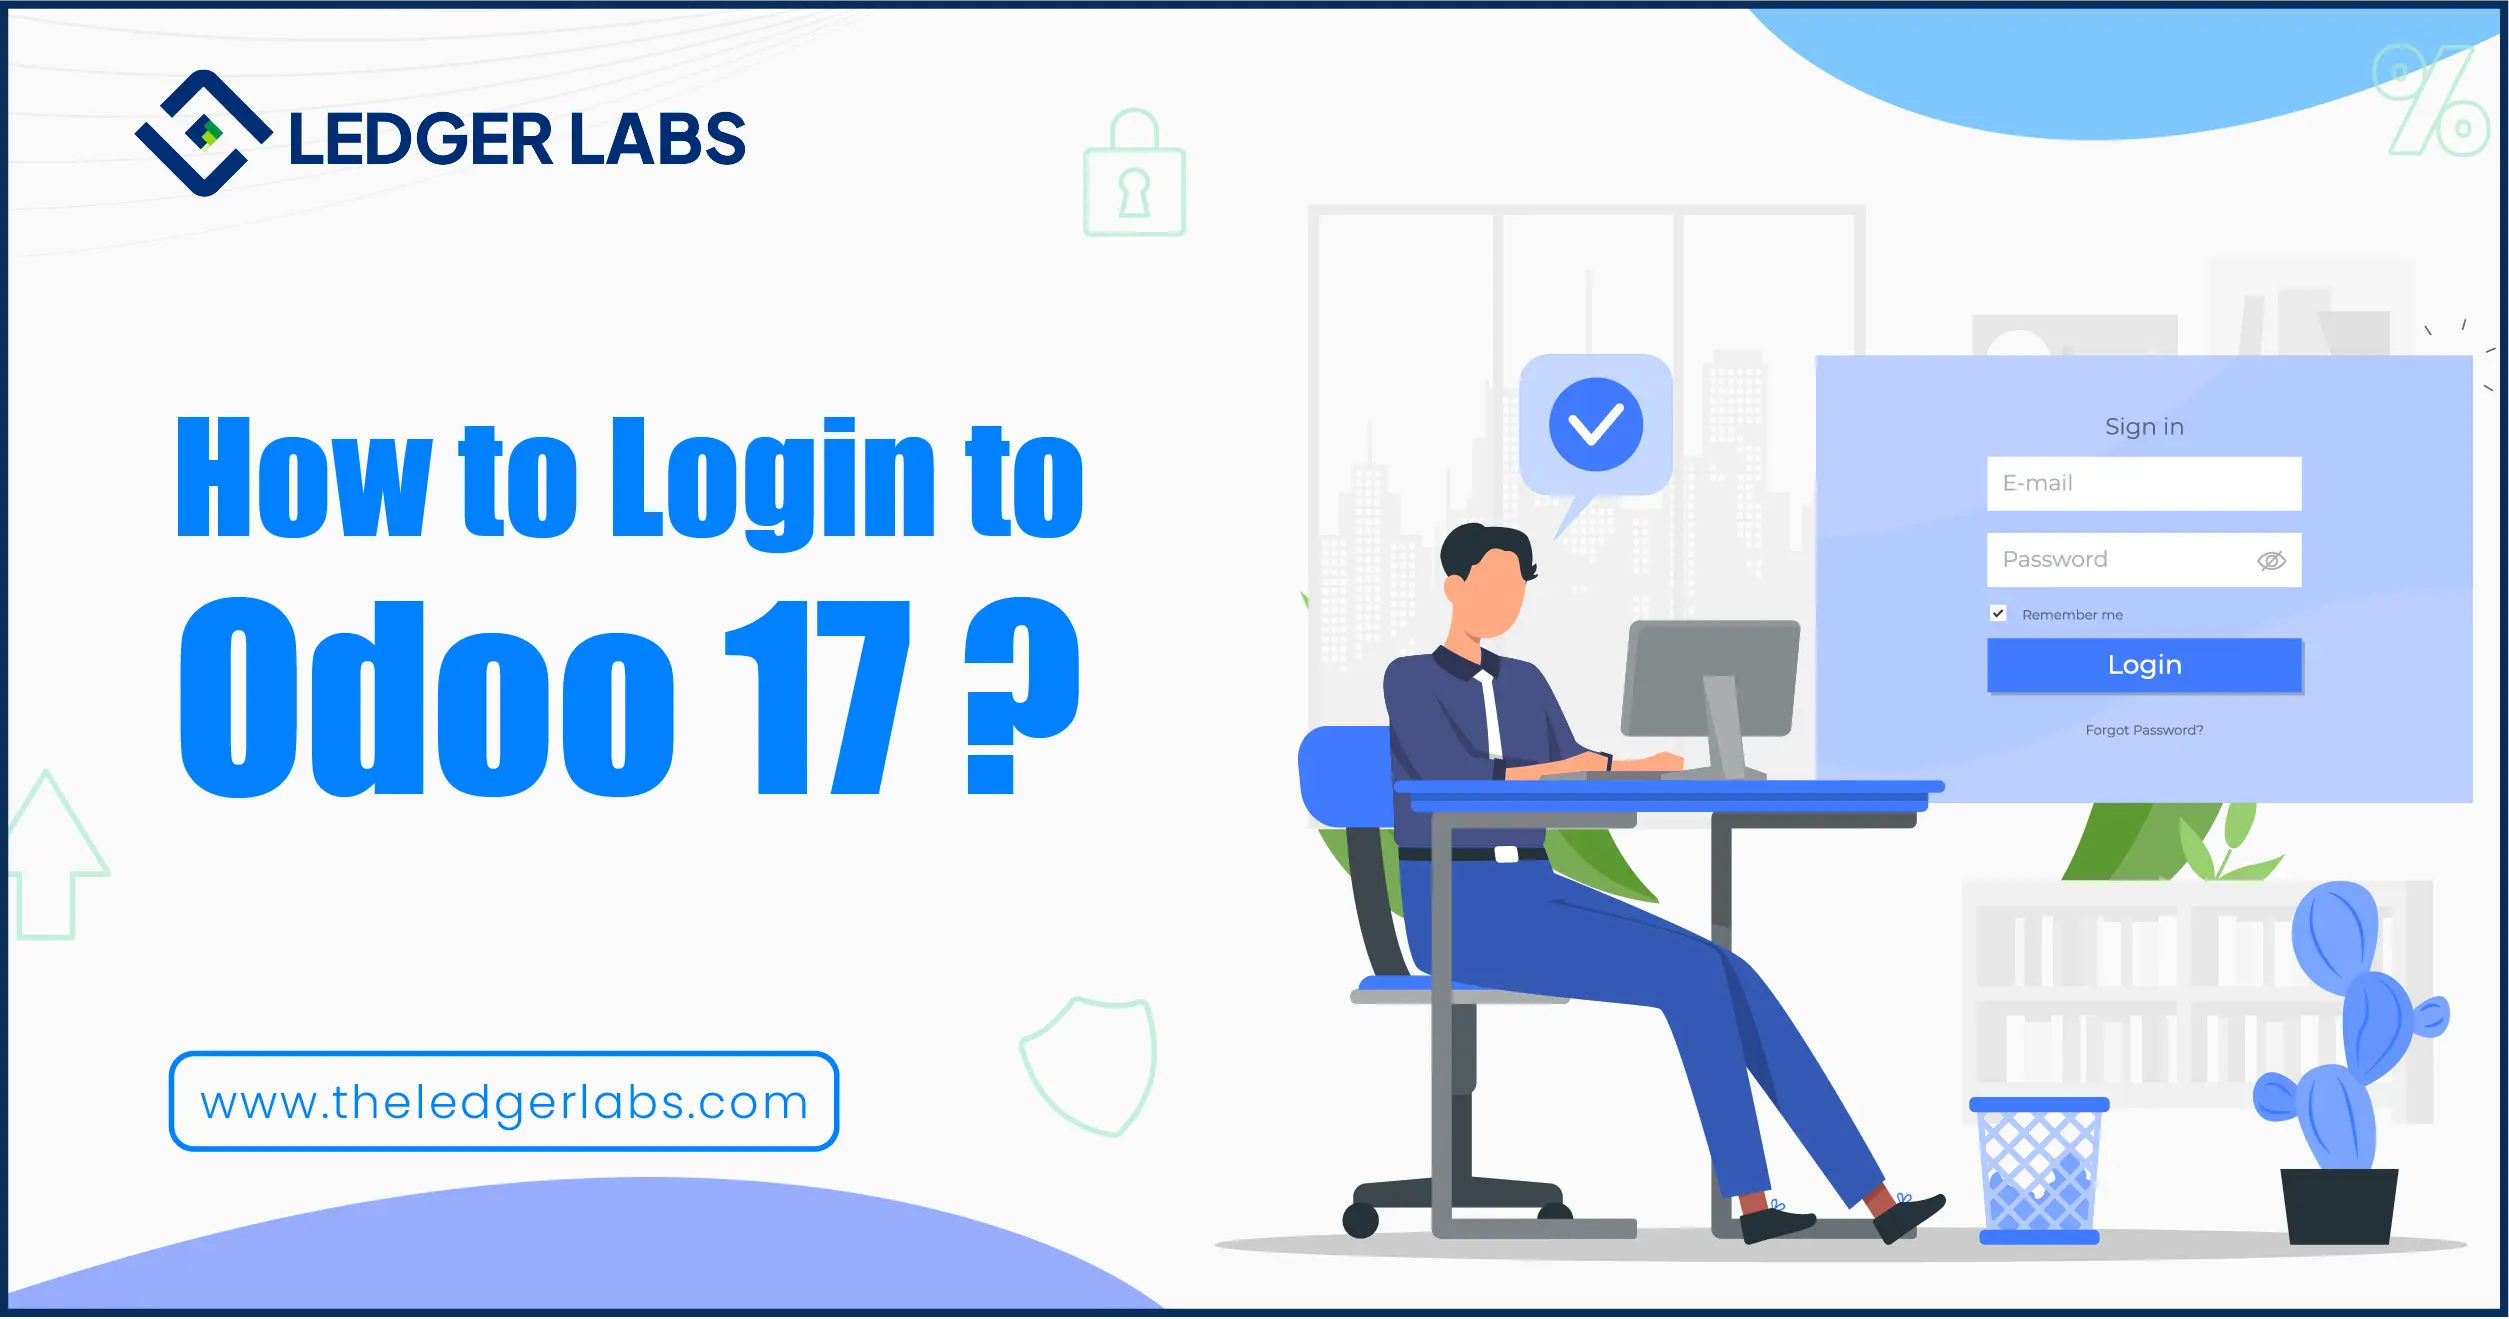 How to Login to Odoo 17